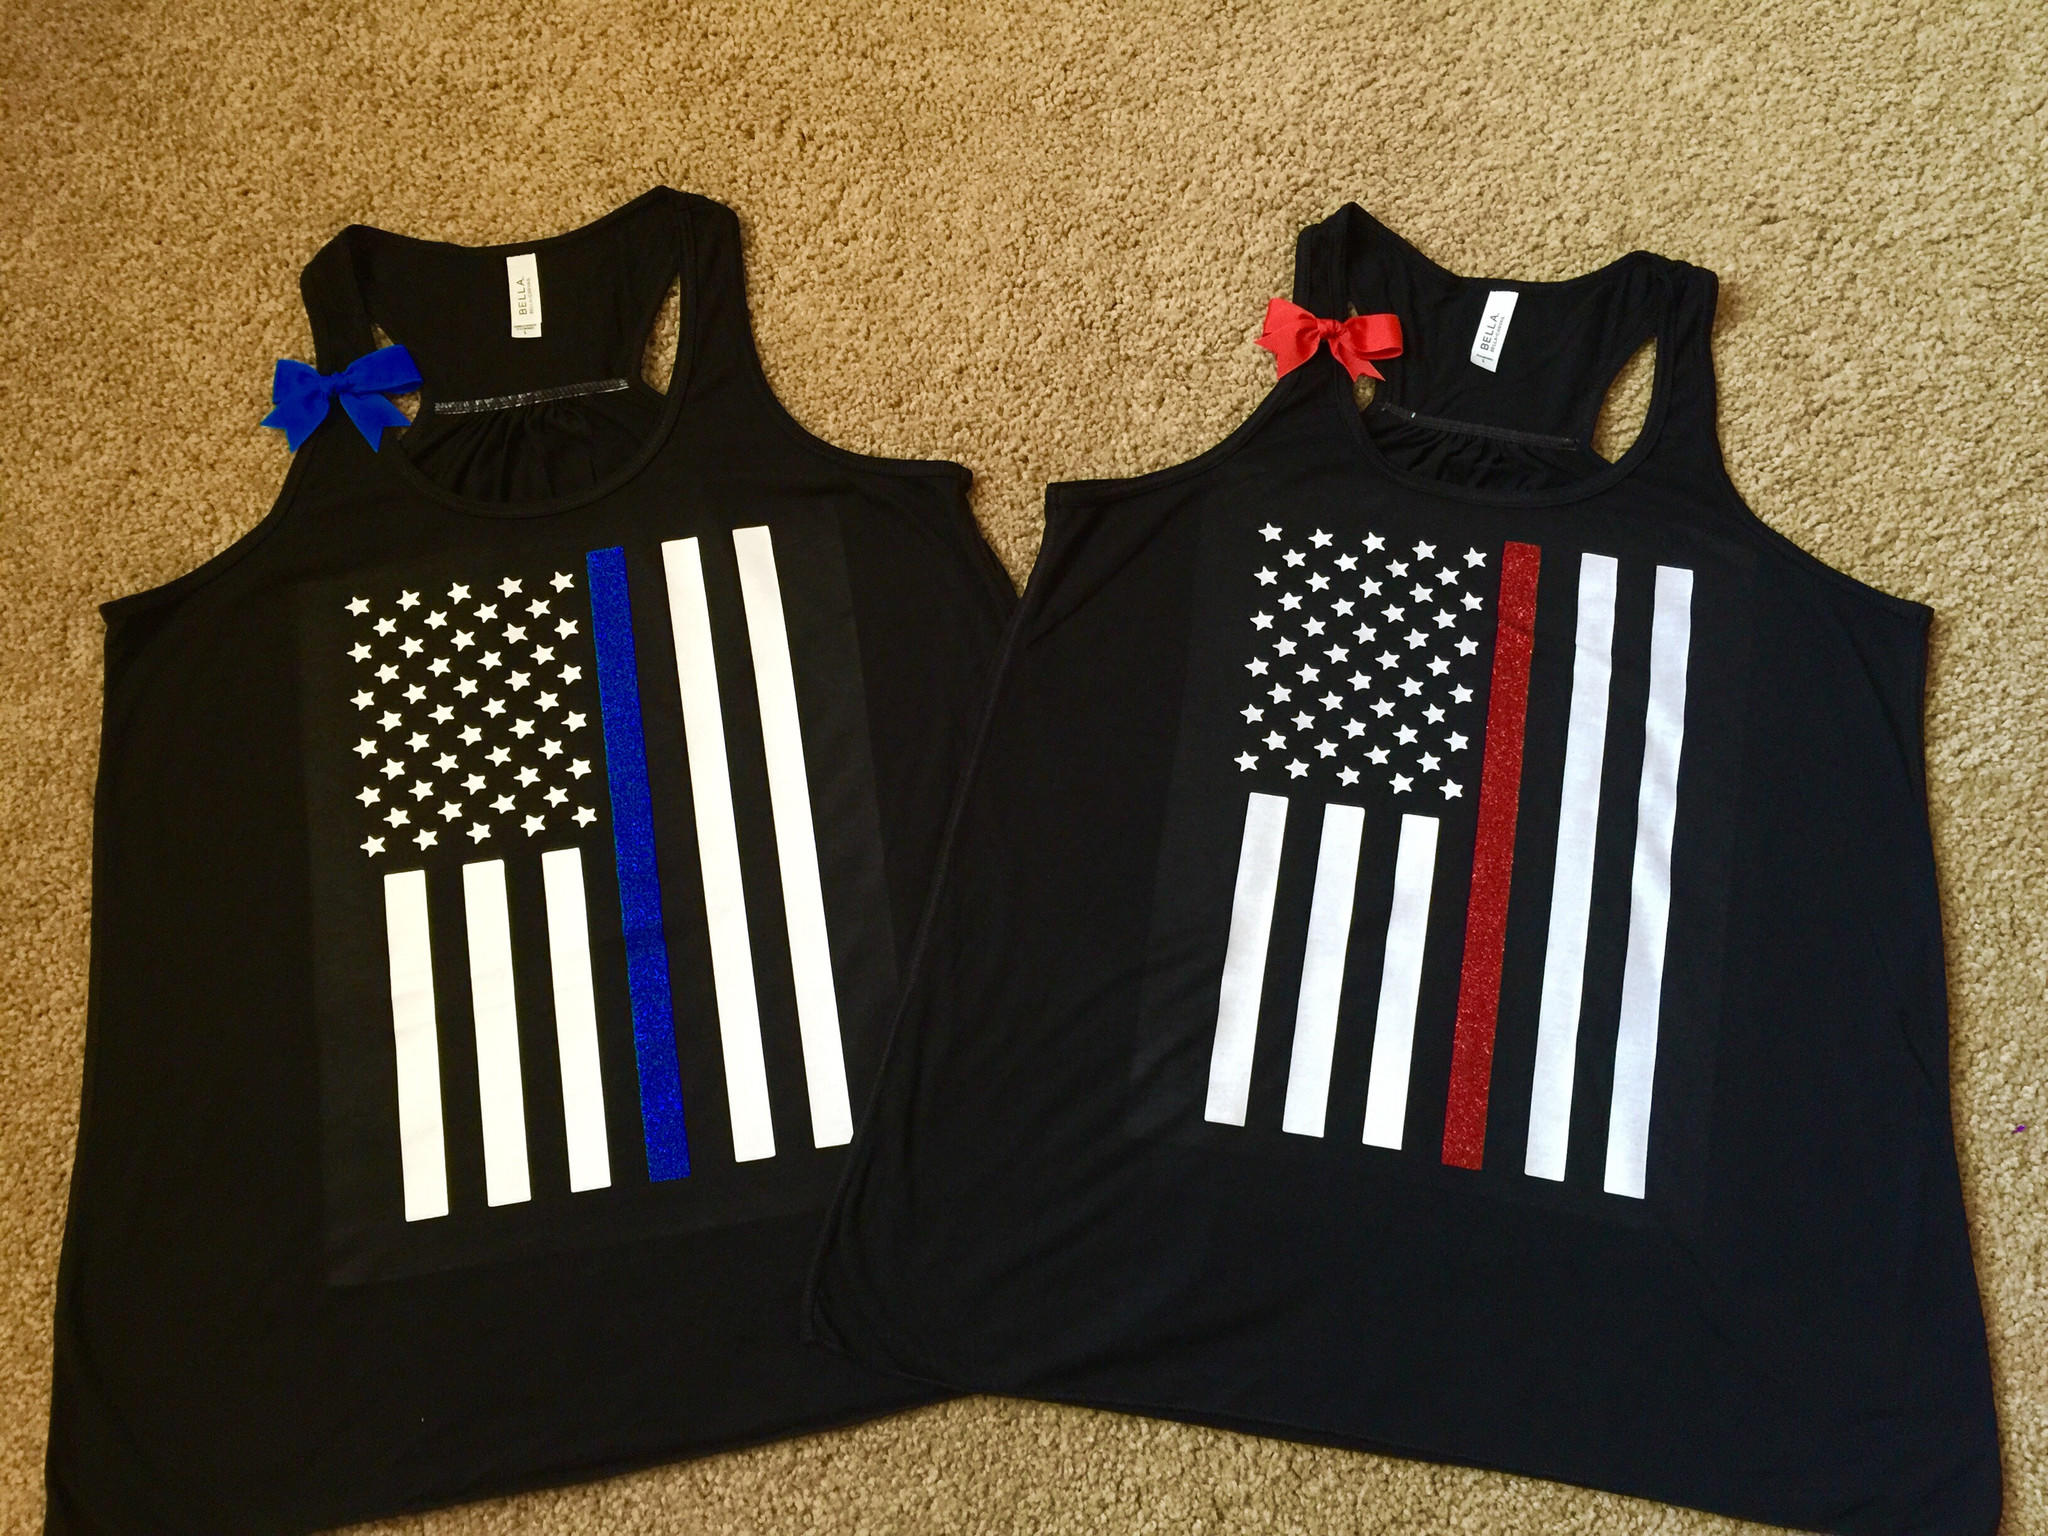 Thin Red And Blue Line Shirt - HD Wallpaper 